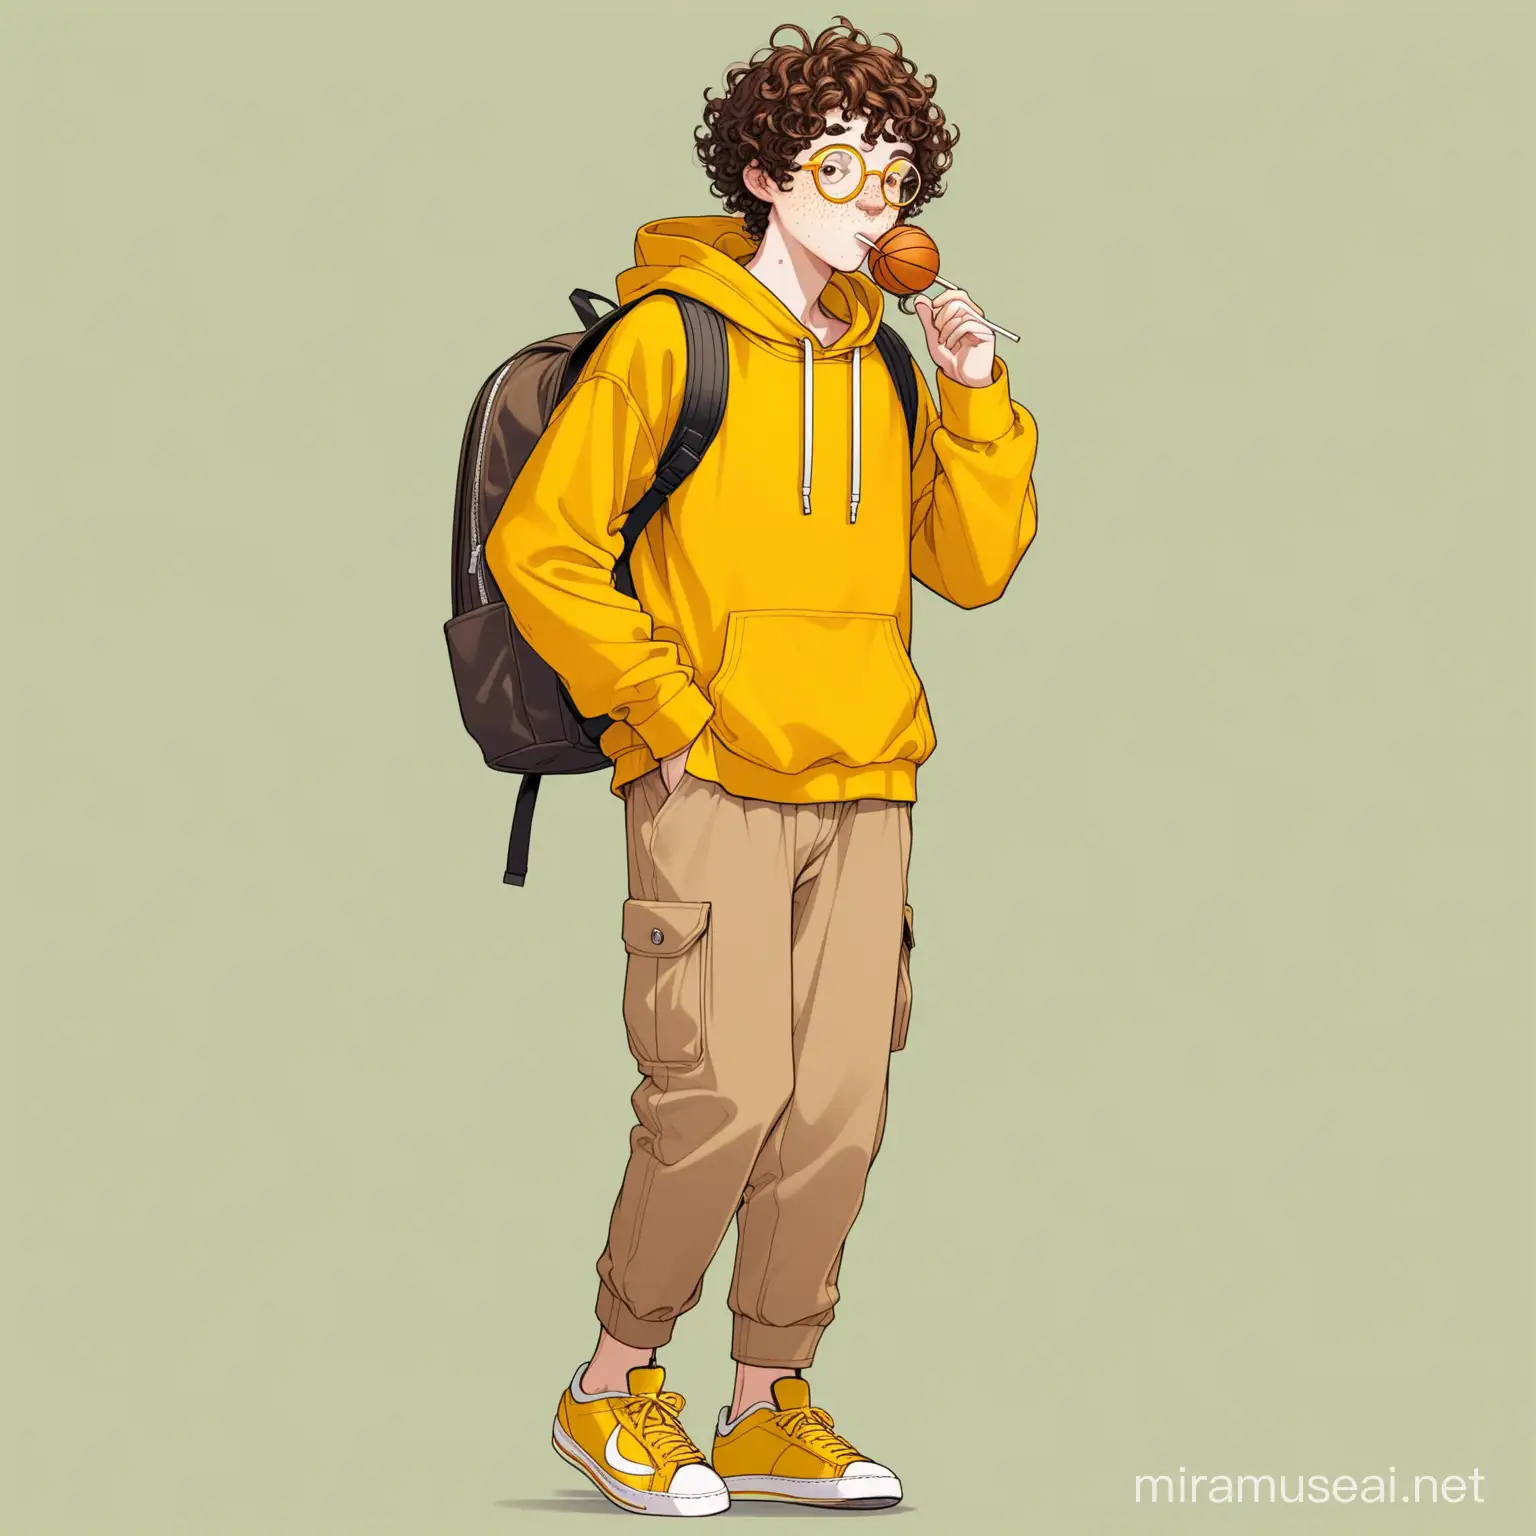 Teenage Boy with Curly Brown Hair and Yellow Hoodie Enjoying Lollipop and Music